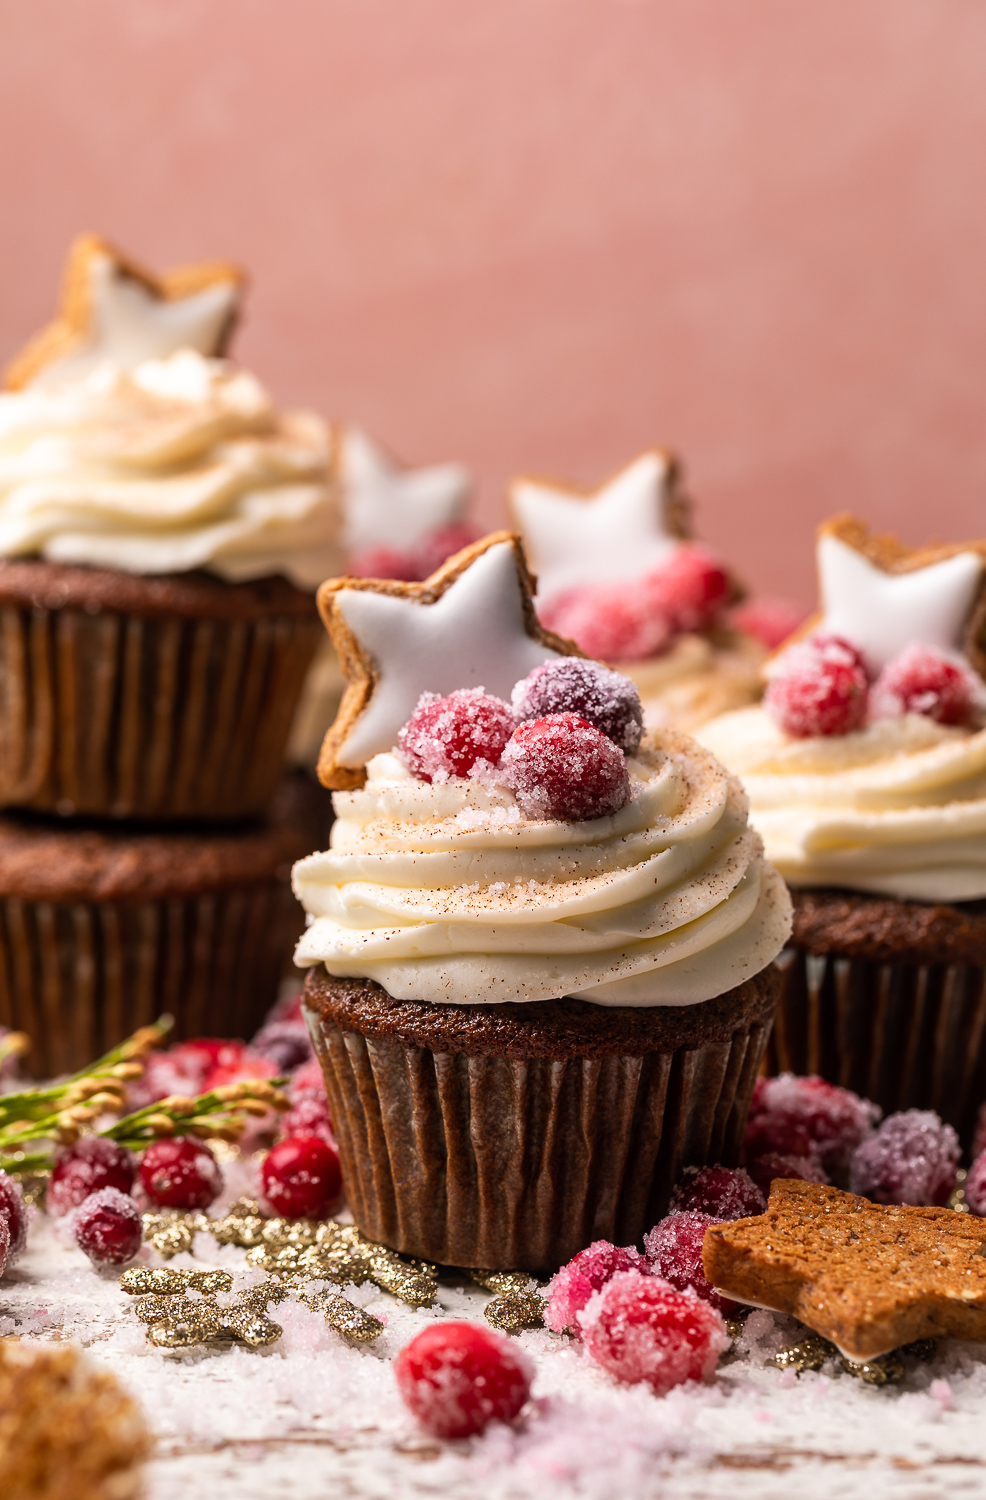 Gingerbread Cupcakes are topped with Mascarpone Frosting and Maple Candied Cranberries! Moist, fluffy, and so flavorful, these are a holiday classic! And the perfect crowd-pleasing holiday dessert recipe for your next party!